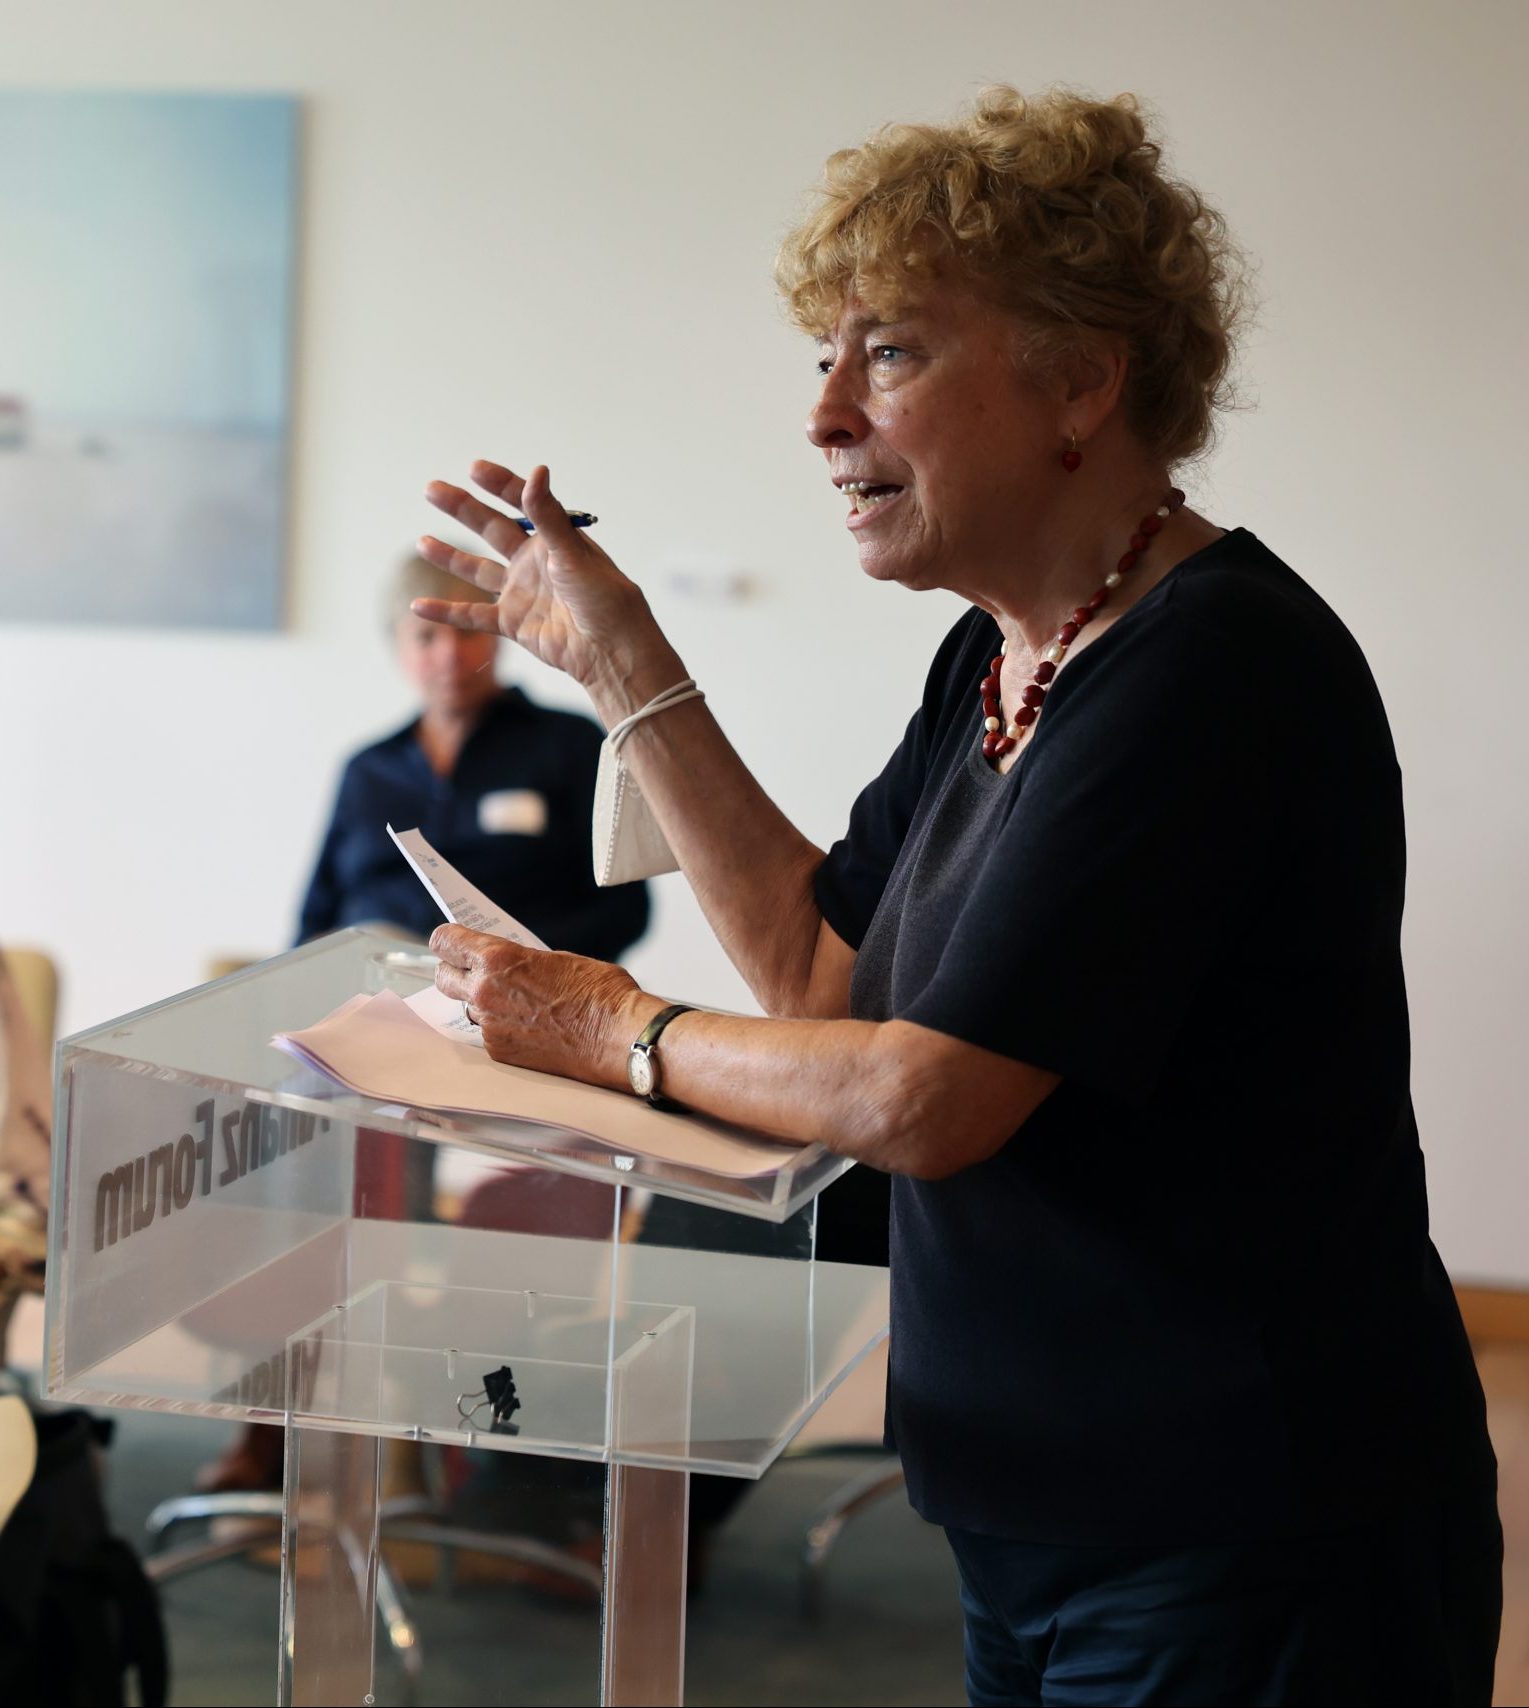 Photo of Gesine Schwan at one of the events in the "Social Cohesion" trialogue series